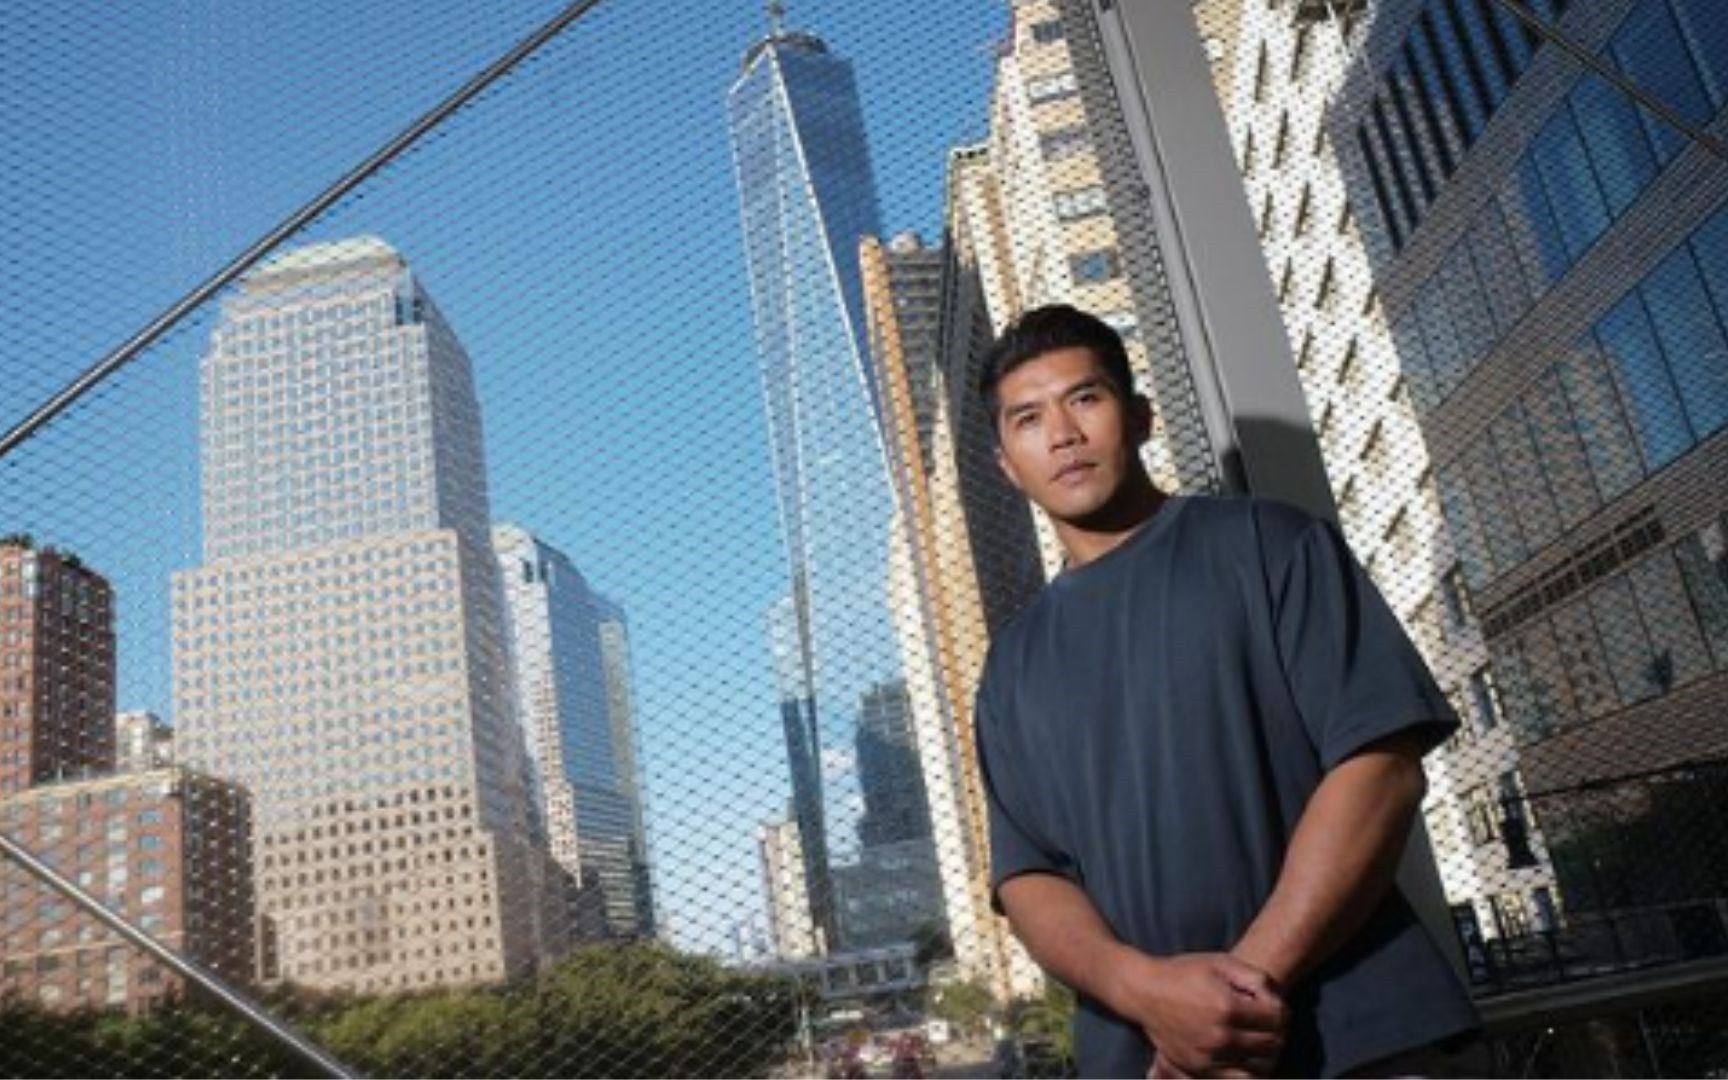 Fil-Am martial artist hailed a 'hero' after stopping attacker in New York